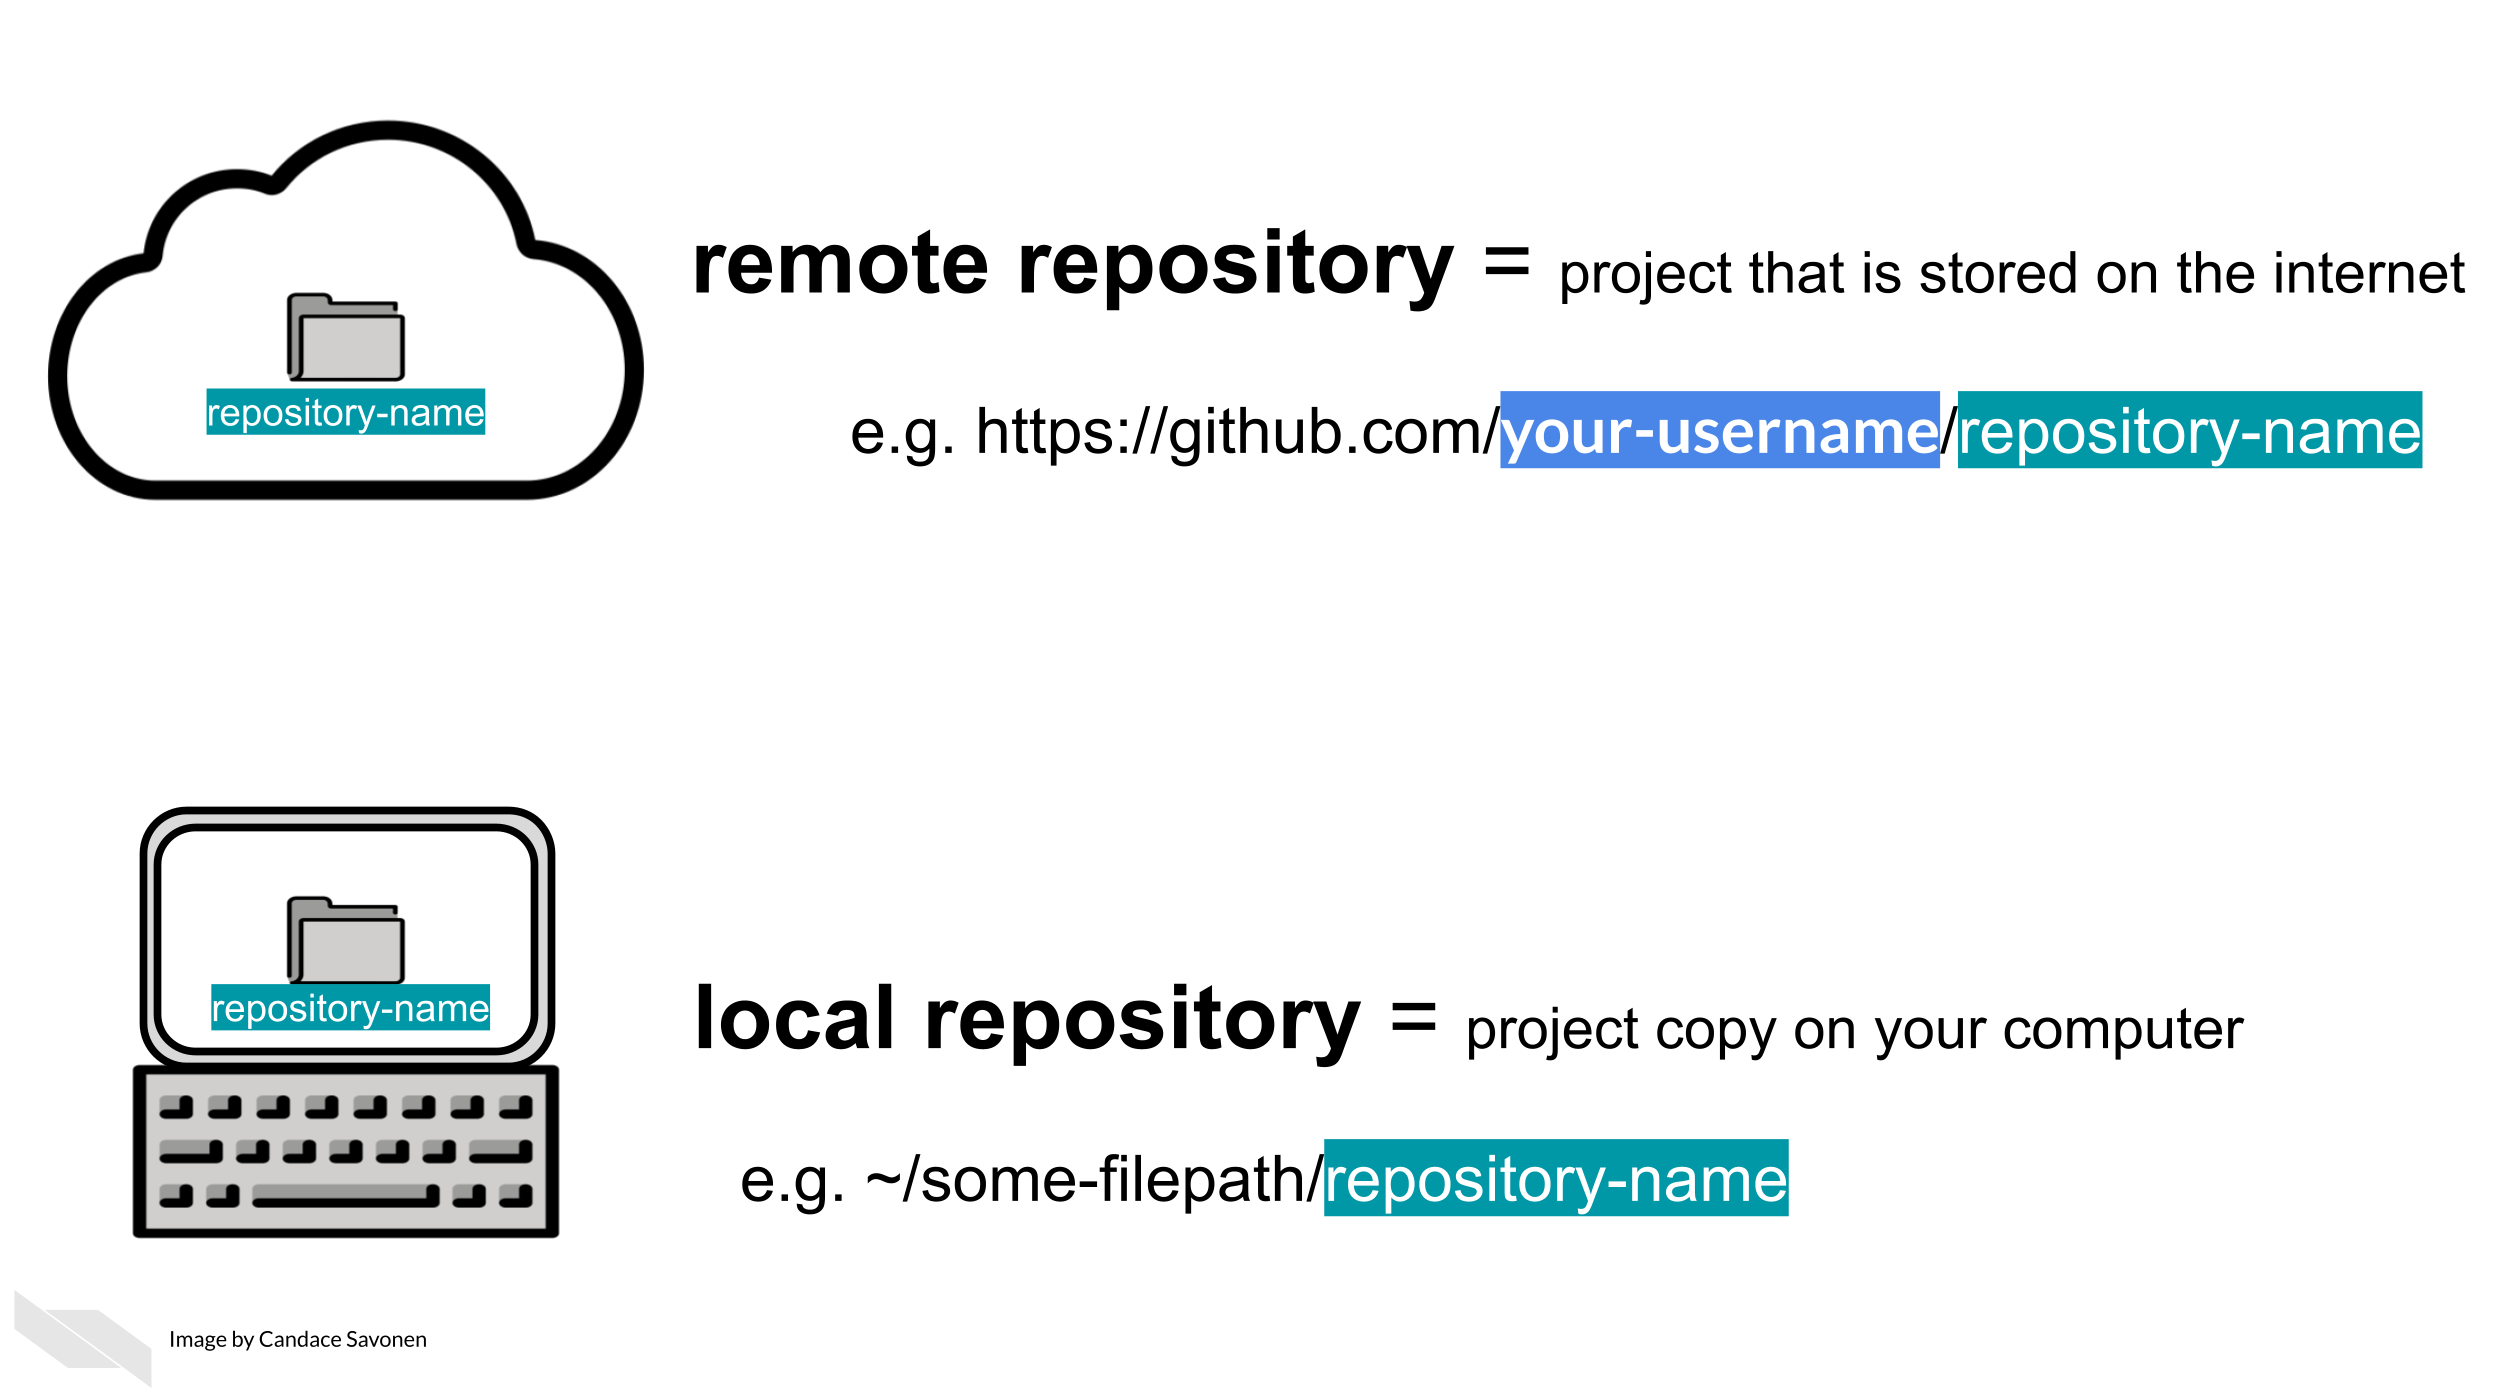 A remote repository is project that is stored on the internet for example, a URL to jhudsl/reproducible-R-example. A local repository is a project copy that lives on your computer. For example, a file path to reproducible-R-example. So using GitHub, a project will exist both as a remote repository and a local repository. (It will be on the internet on GitHub and on your computer). 